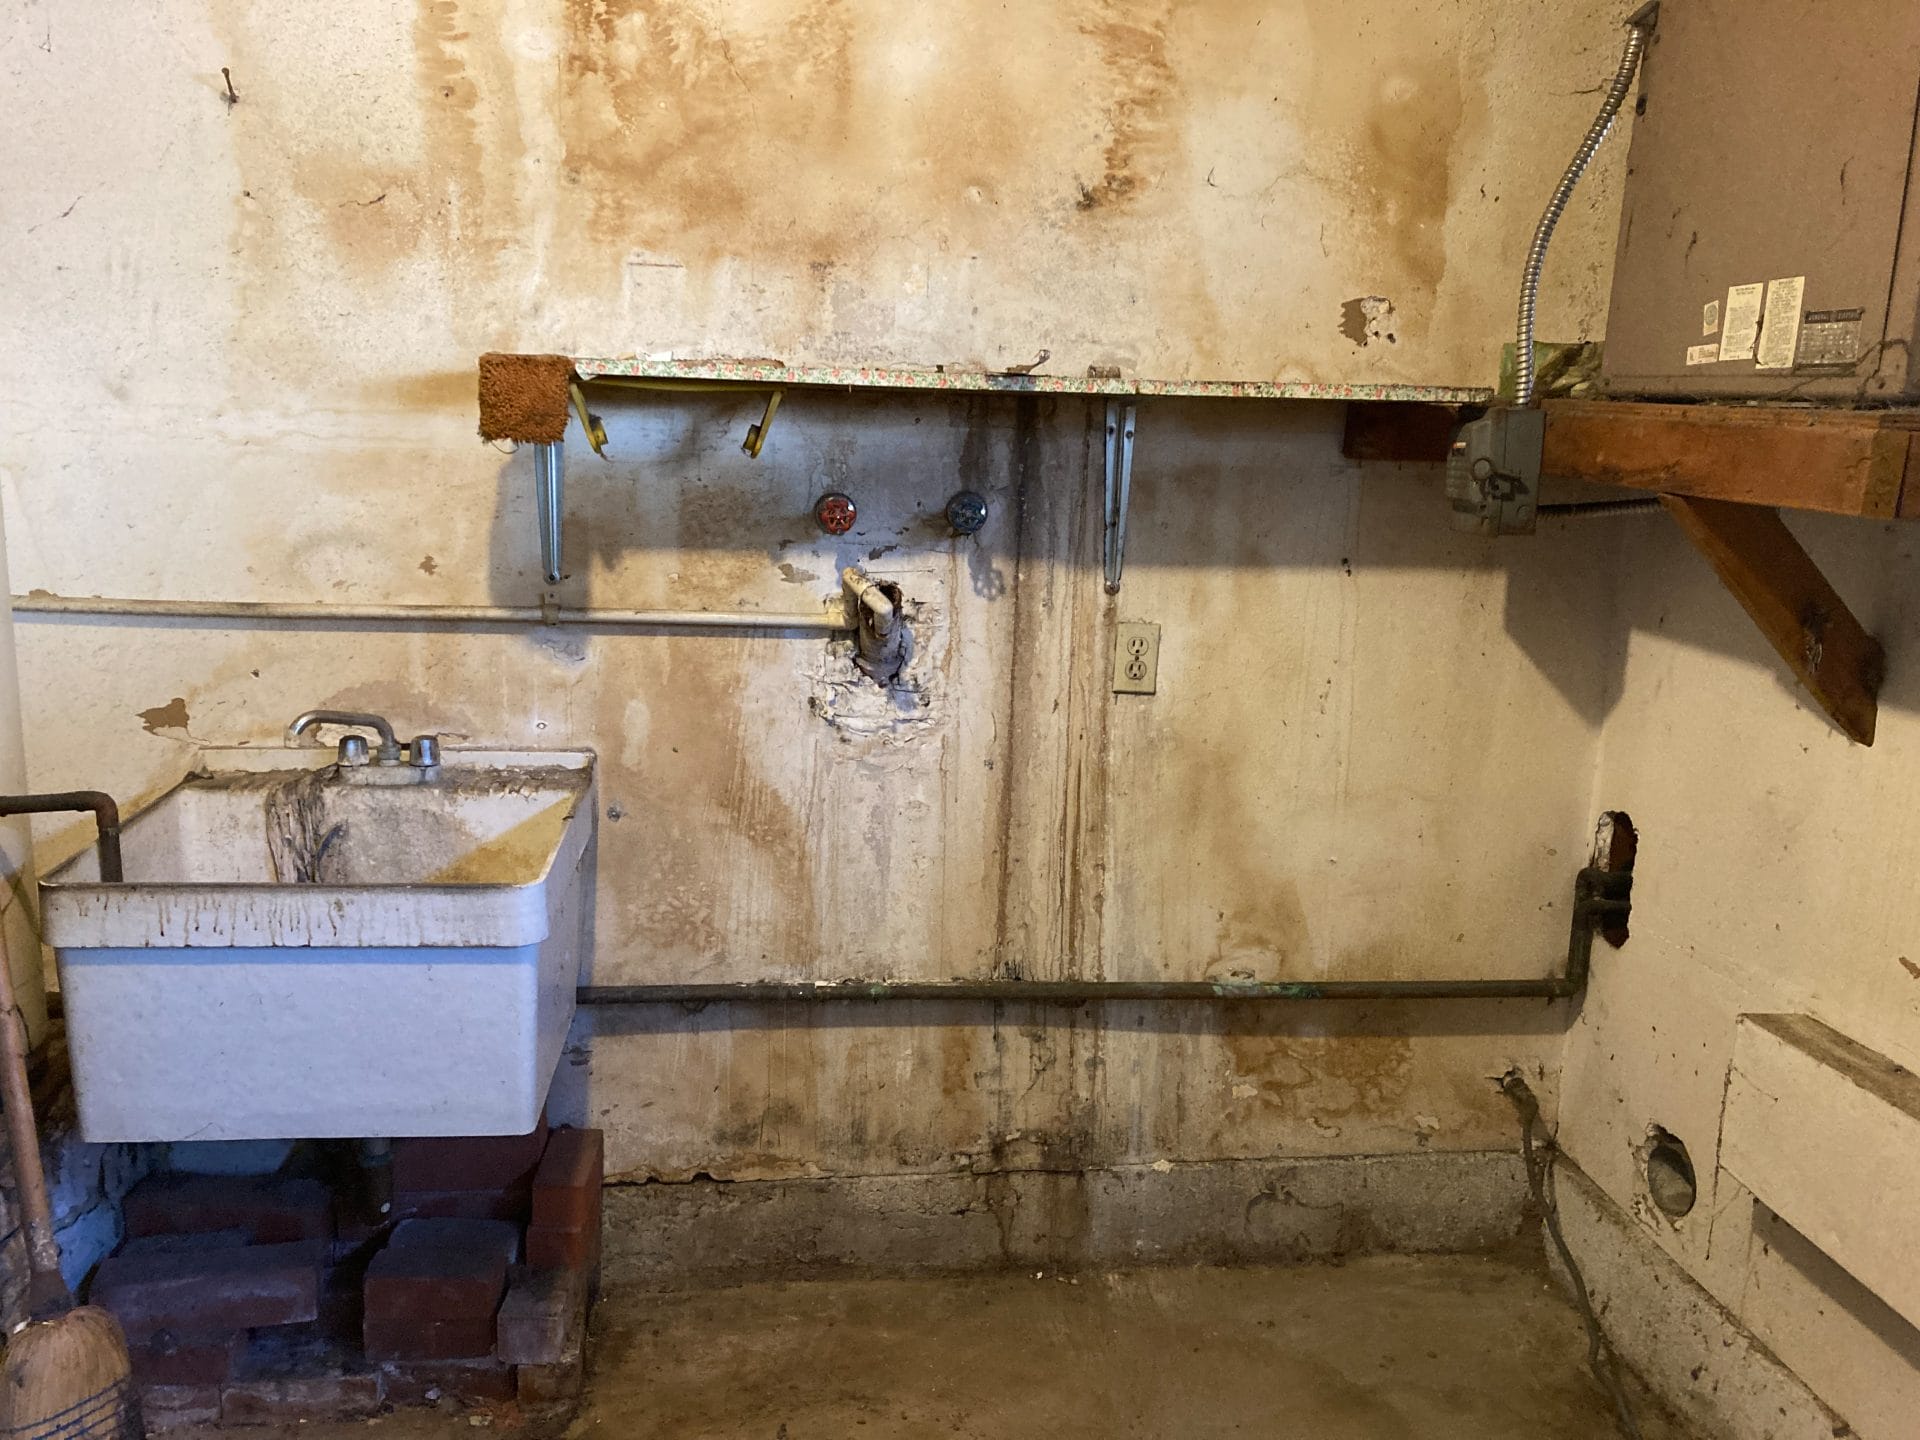 If the water issues are not promptly fixed, mold will continue to grow and evolve into a very dangerous environment for both humans and animals.